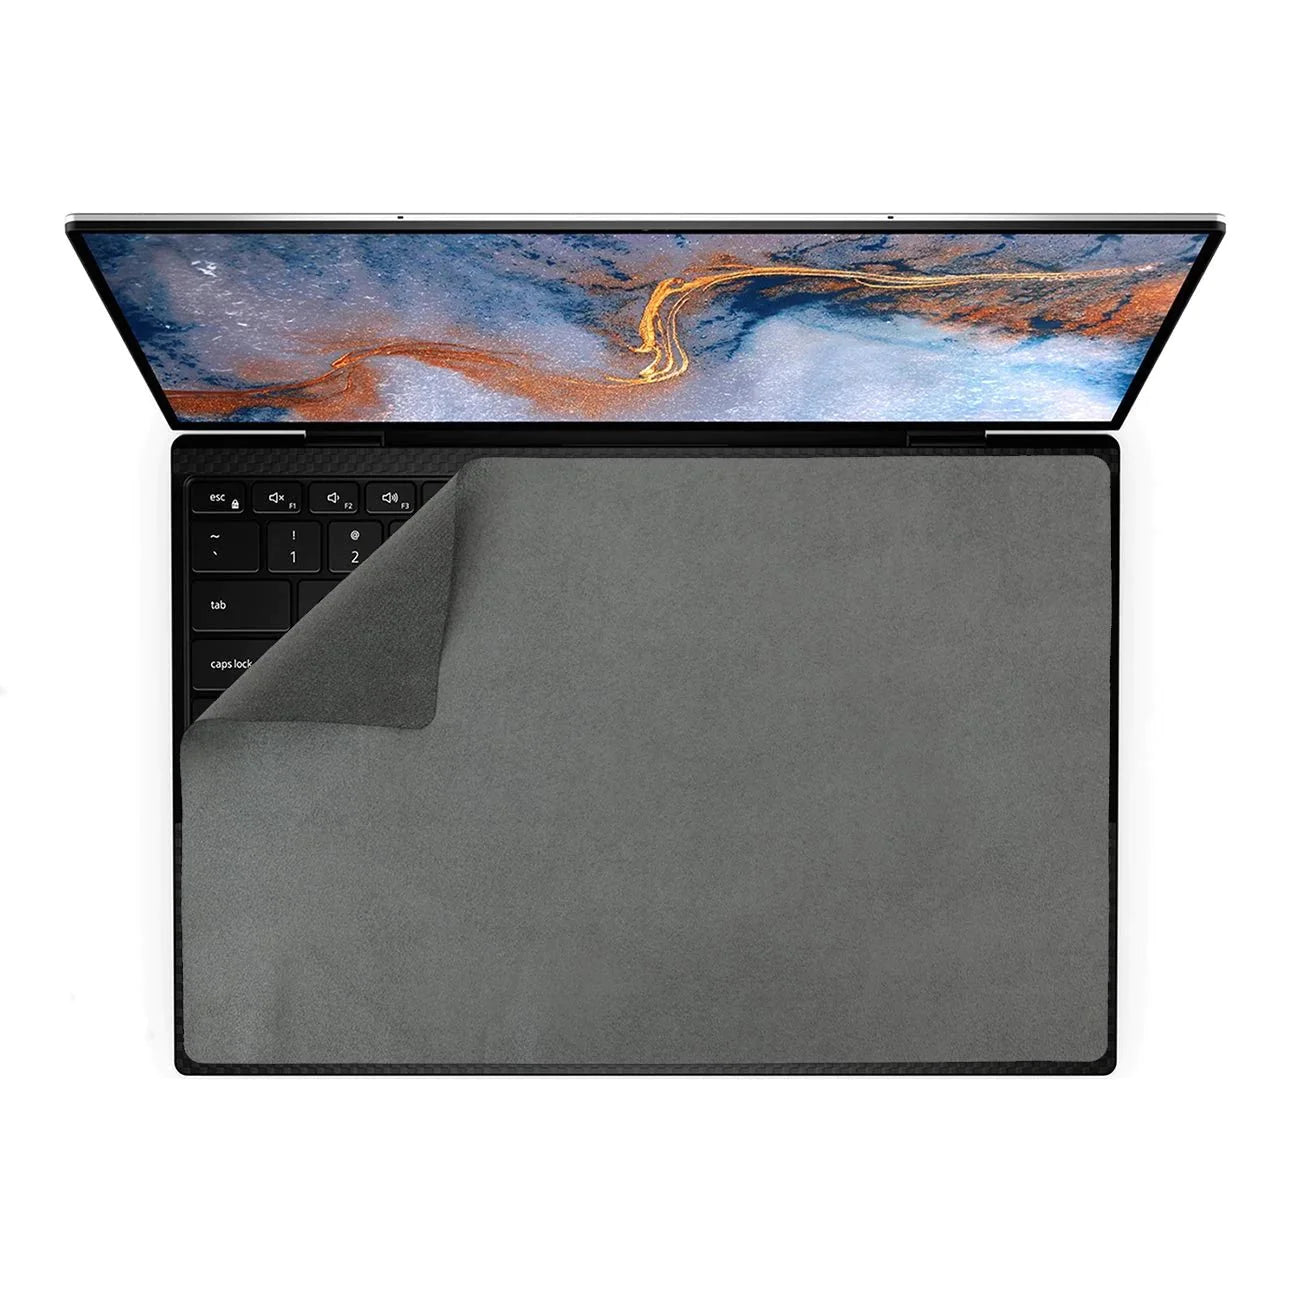 Laptop Screen Protector for MacBook, PC, Flagship & Custom, Made in USA | ShaggyMax